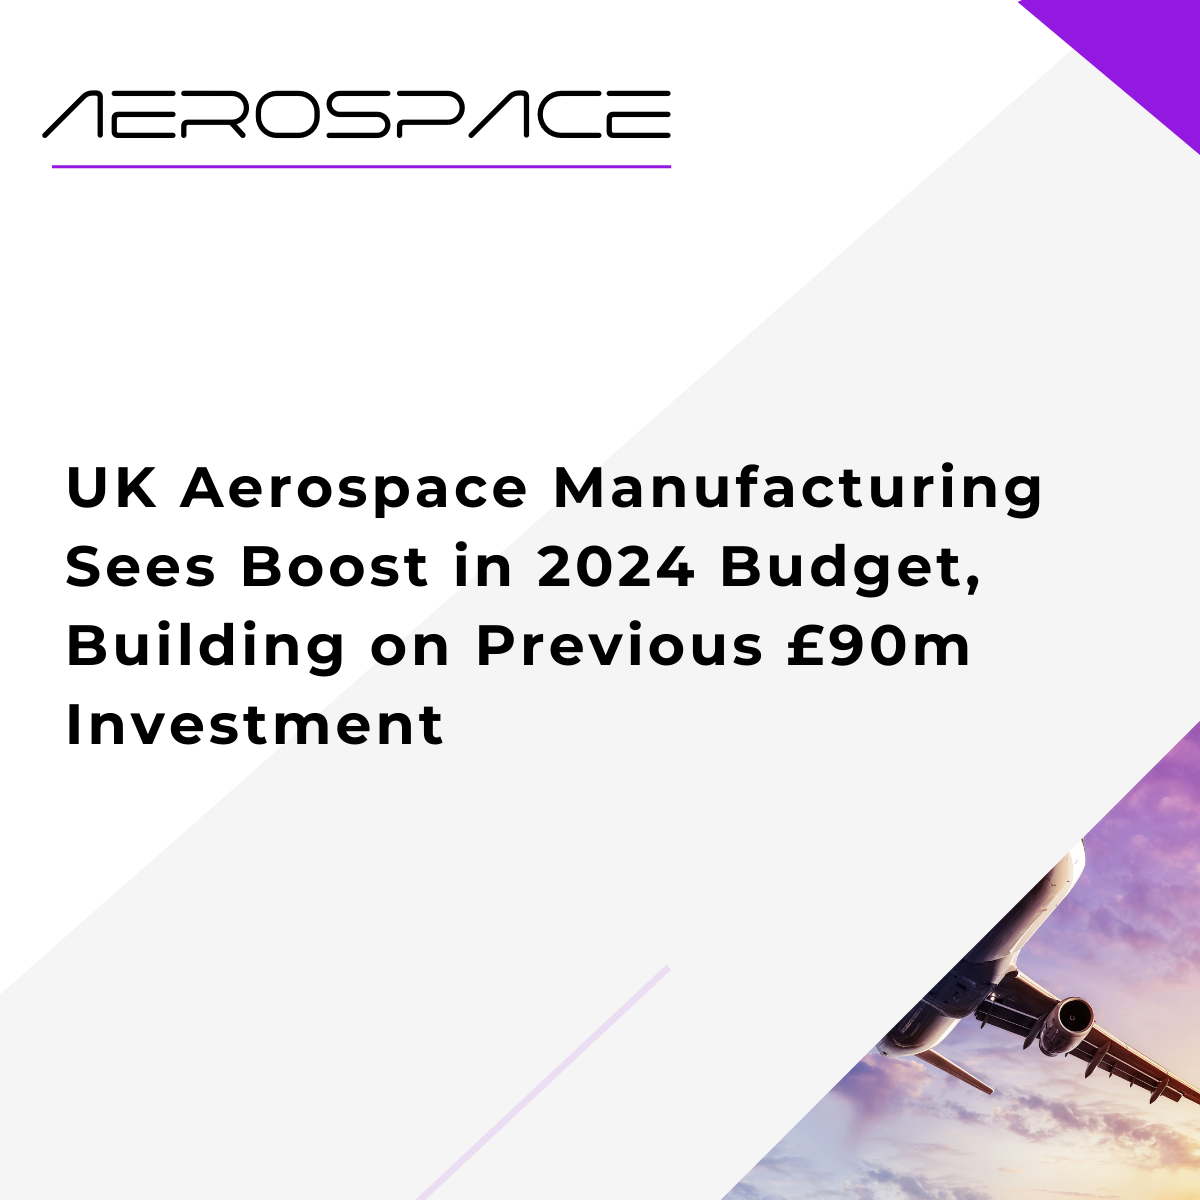 UK Aerospace Manufacturing Sees Boost in 2024 Budget, Building on Previous £90m Investment